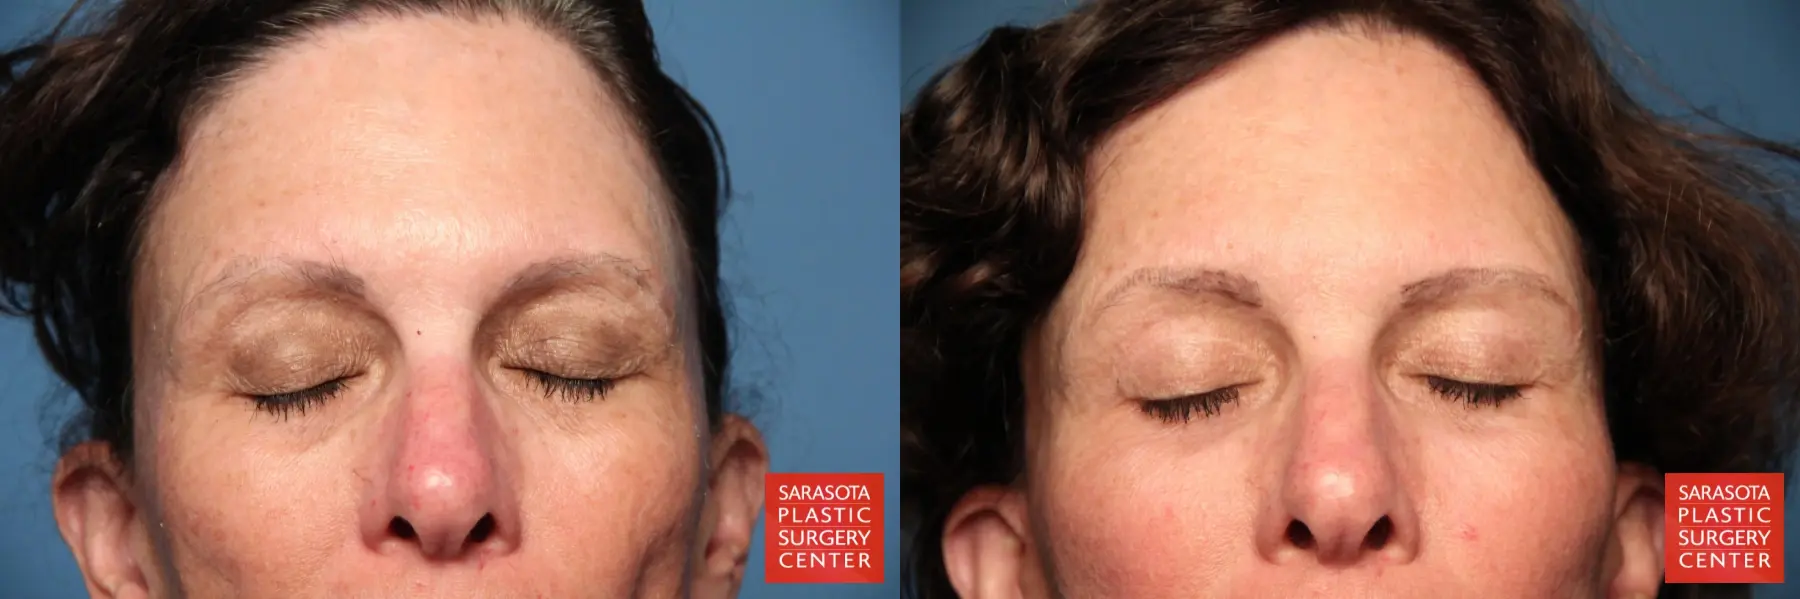 Eyelid Lift: Patient 8 - Before and After 2